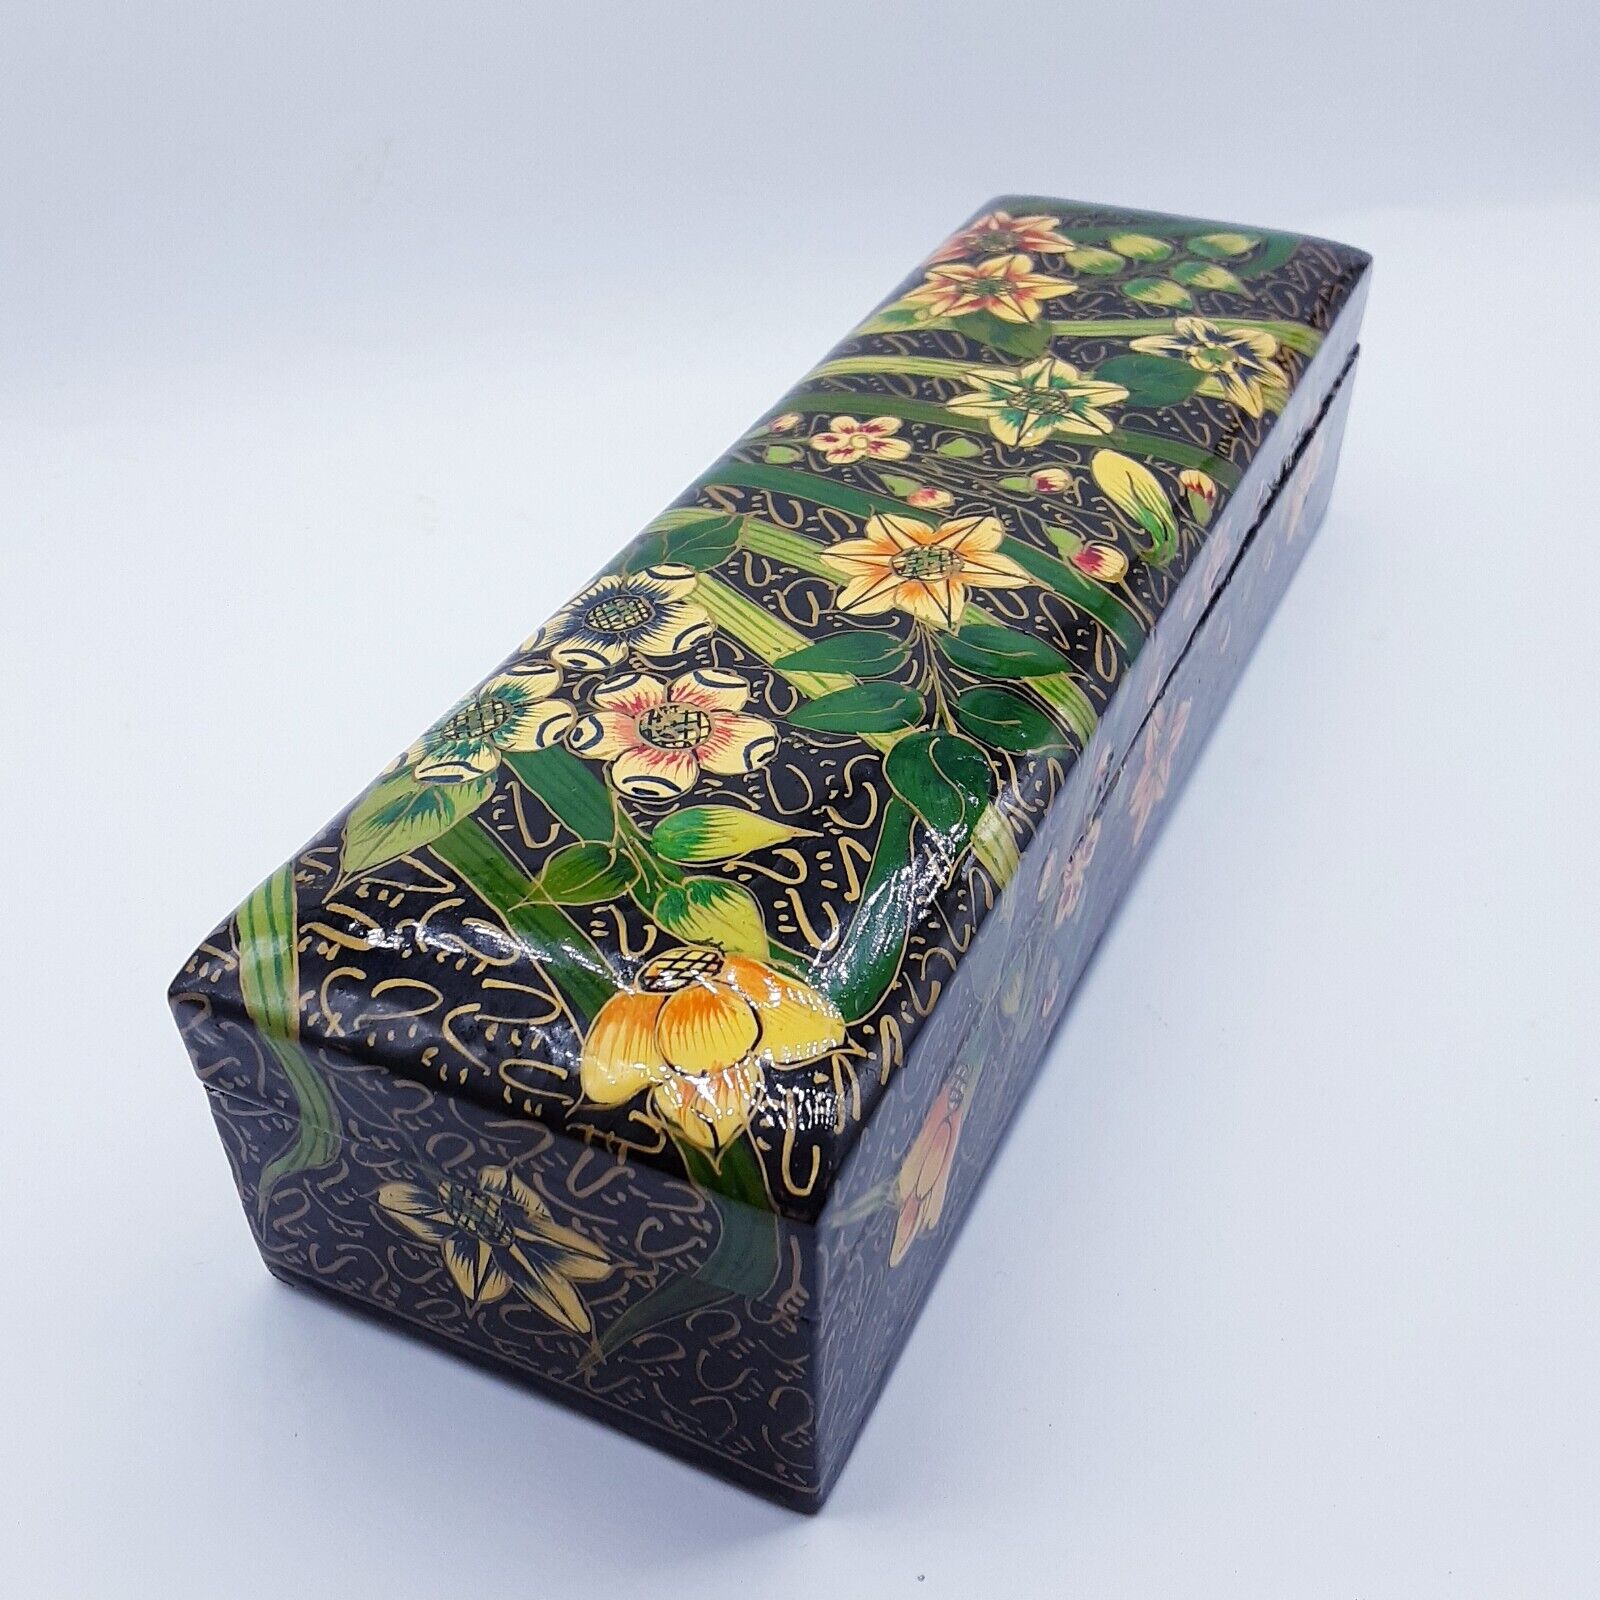 Vintage Kashmir Handcrafted Lacquer wooden pencil Trinket Jewelry Box floral 